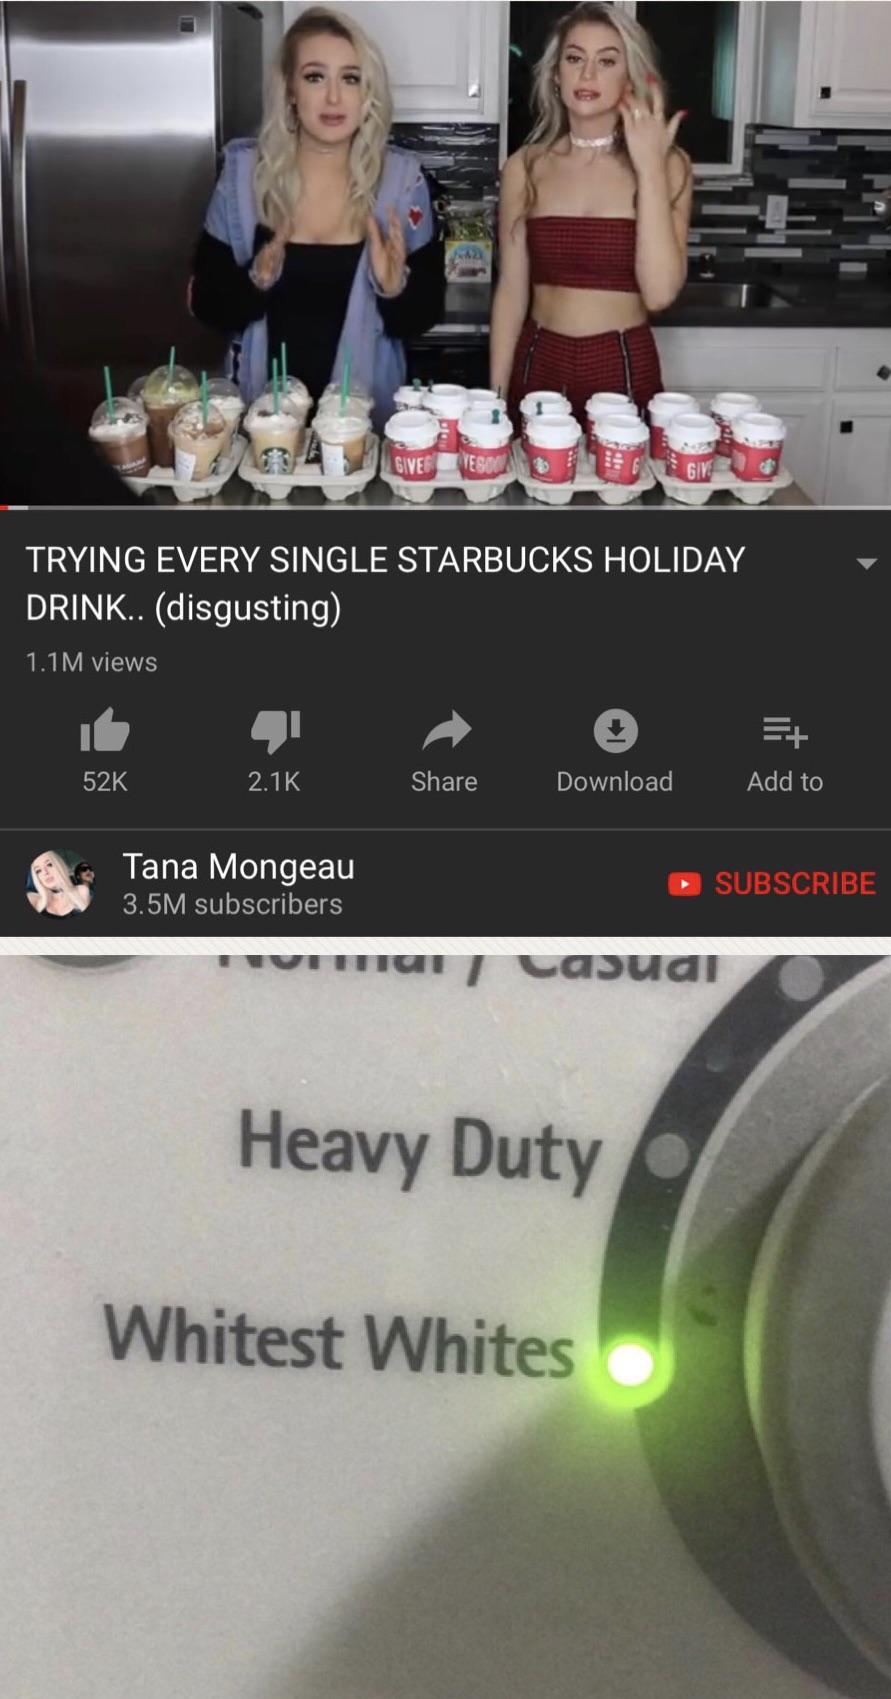 whitest whites meme starbucks - Gasgive Trying Every Single Starbucks Holiday Drink.. disgusting 1.1M views 52K Download Add to Tana Mongeau 3.5M subscribers Subscribe mon casual Heavy Duty Whitest Whites